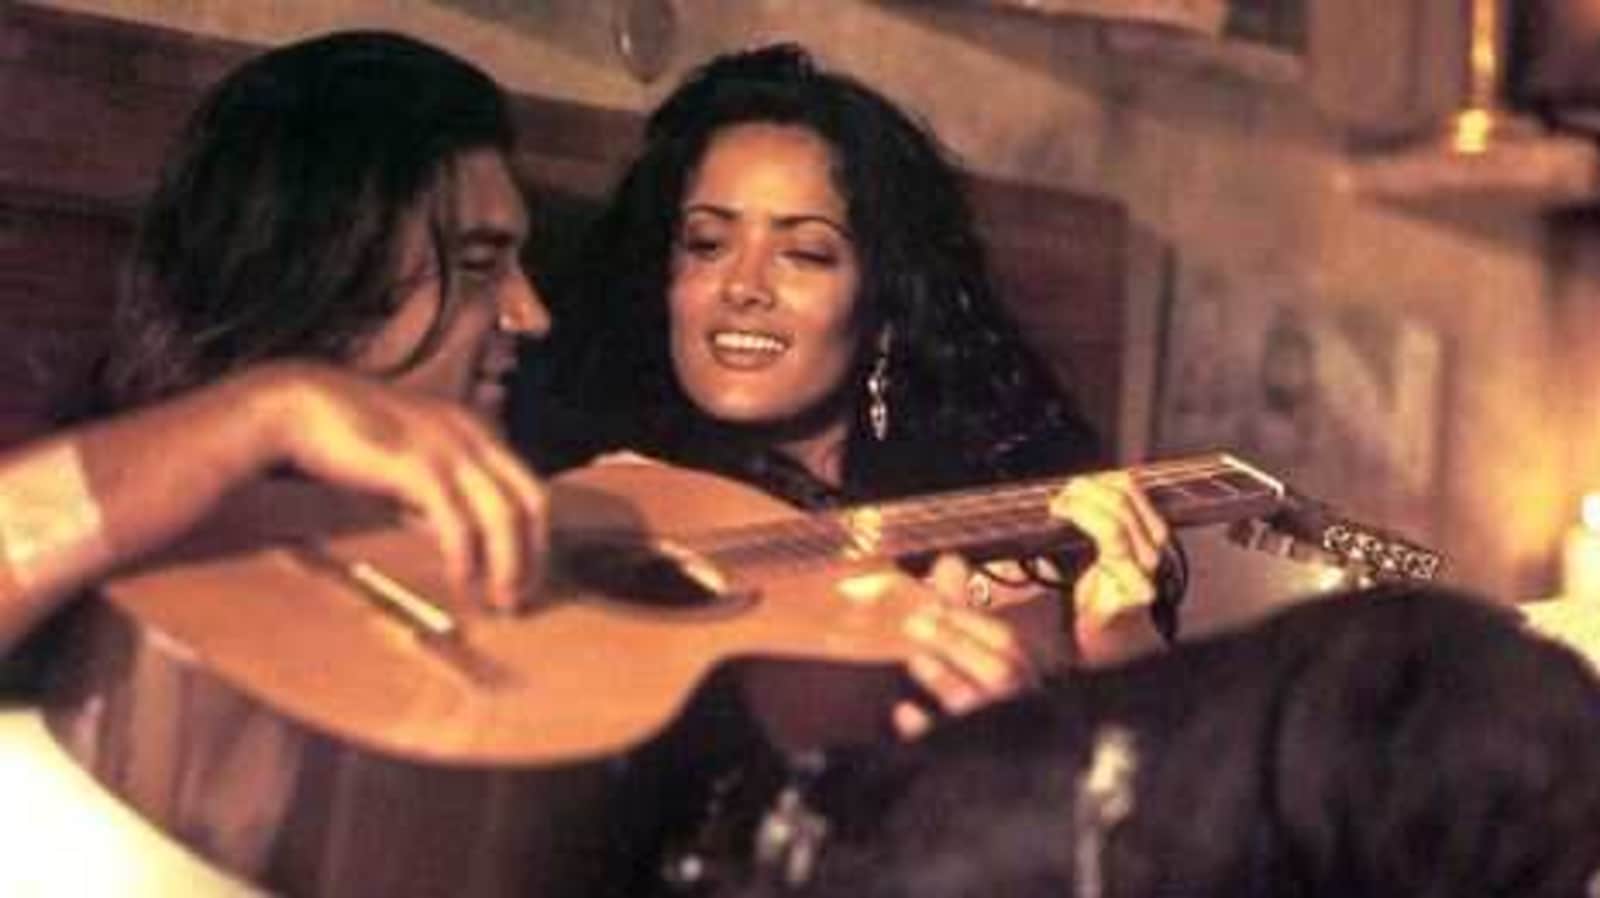 Salma Xxx Video - Salma Hayek cried while shooting Desperado sex scene, 'I keep thinking of  my father and my brother' | Hollywood - Hindustan Times